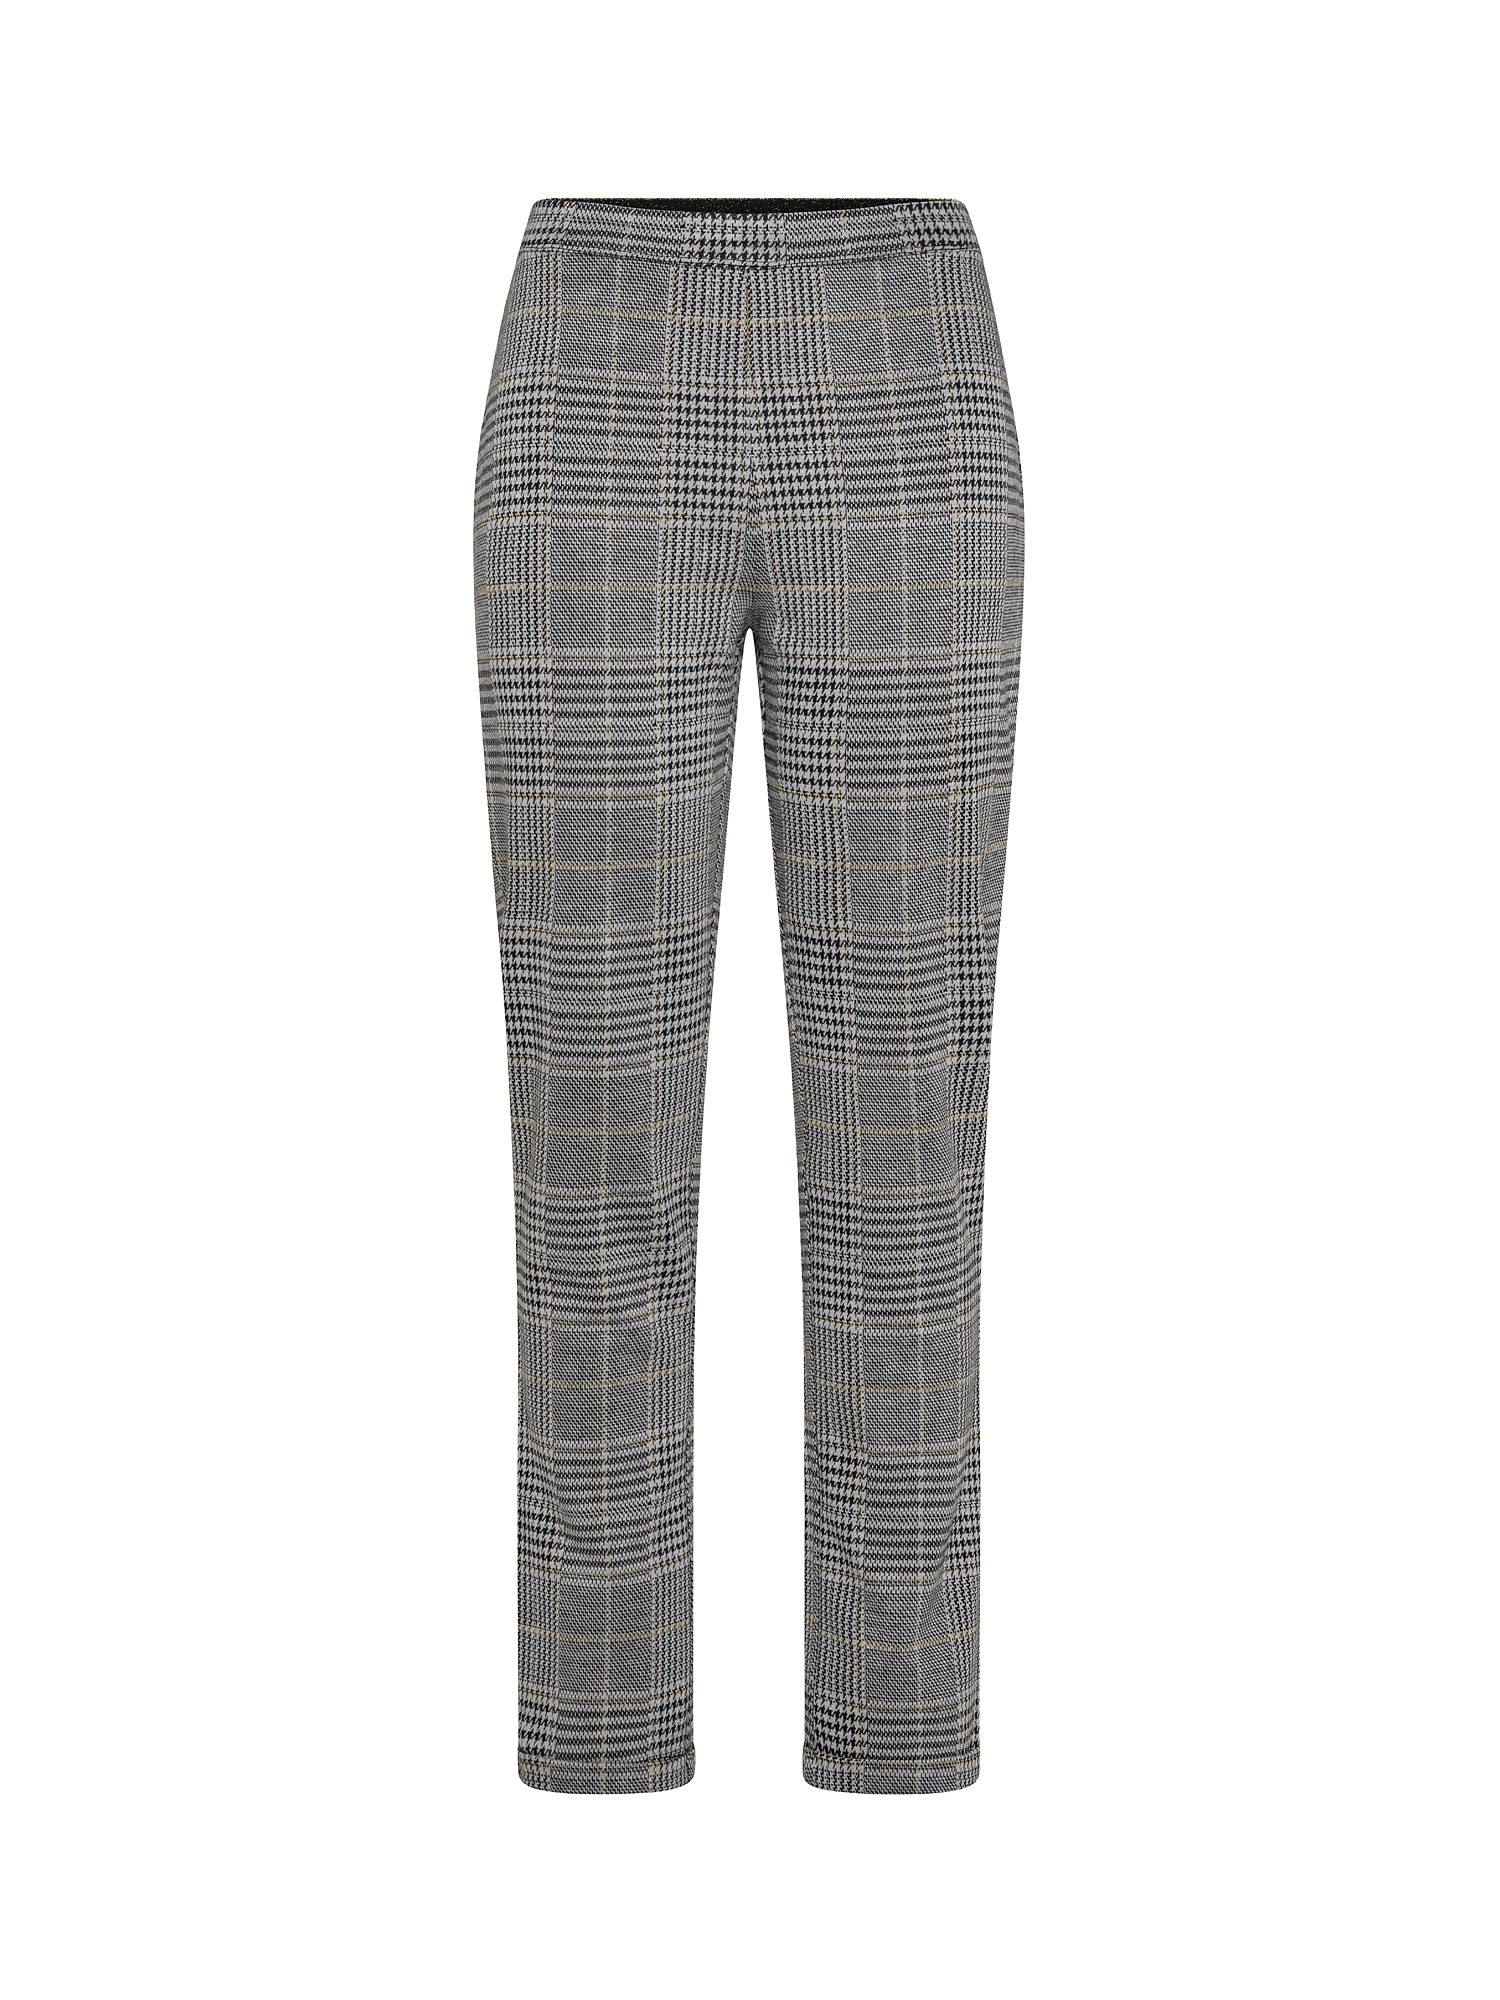 Trousers with lurex fabric, Grey, large image number 0